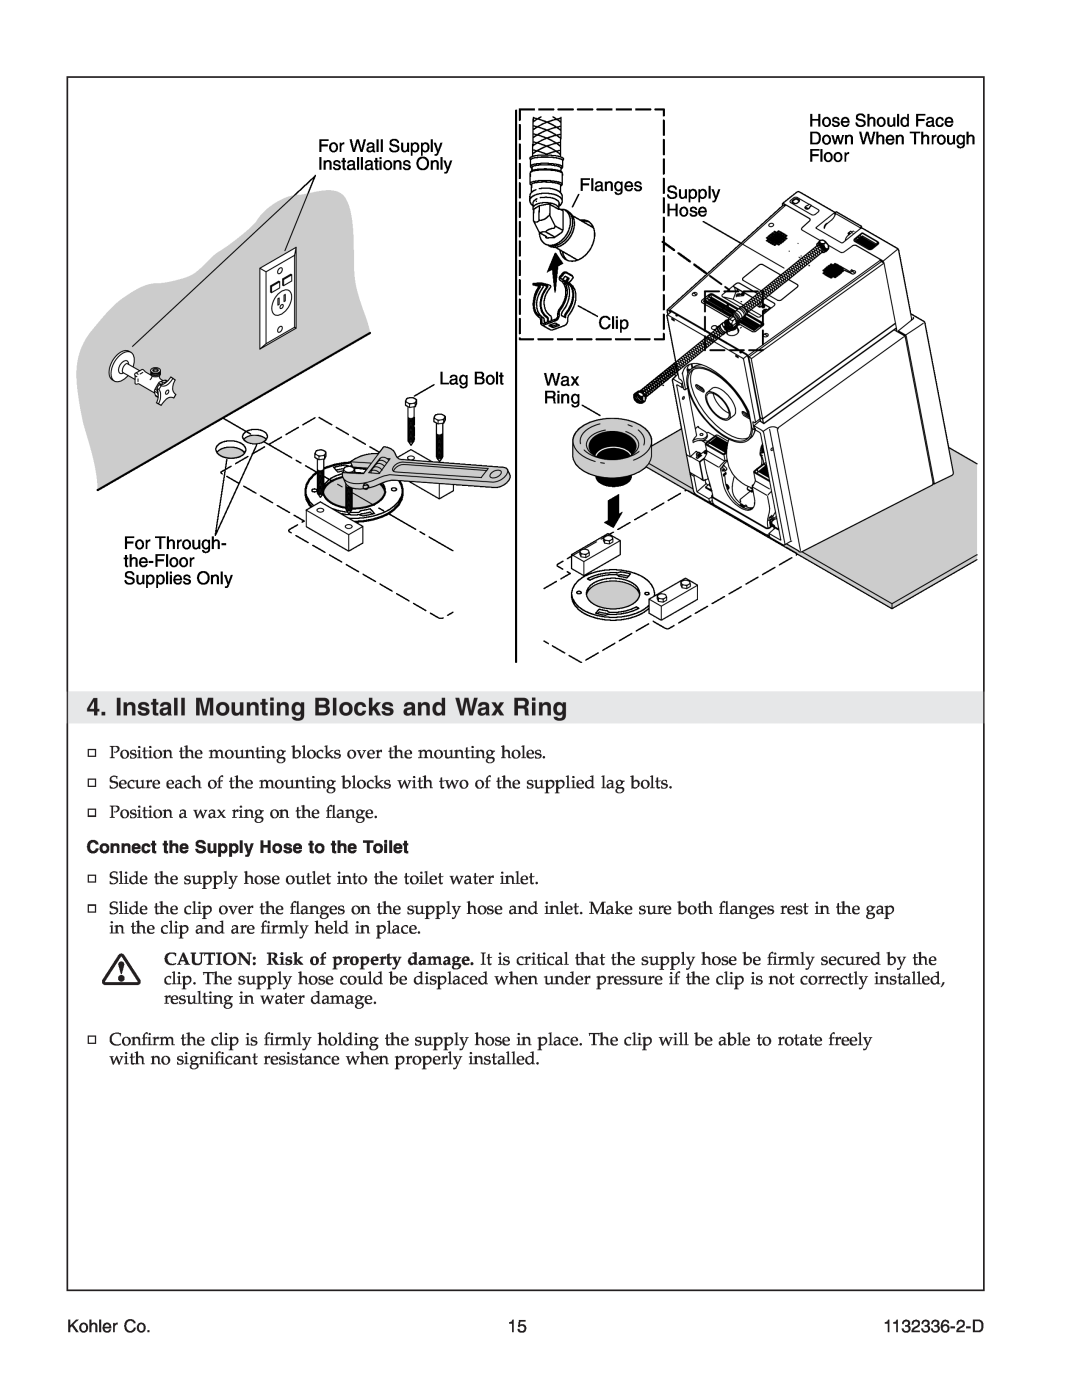 Kohler K-3900 manual Install Mounting Blocks and Wax Ring, Connect the Supply Hose to the Toilet, Kohler Co, 1132336-2-D 